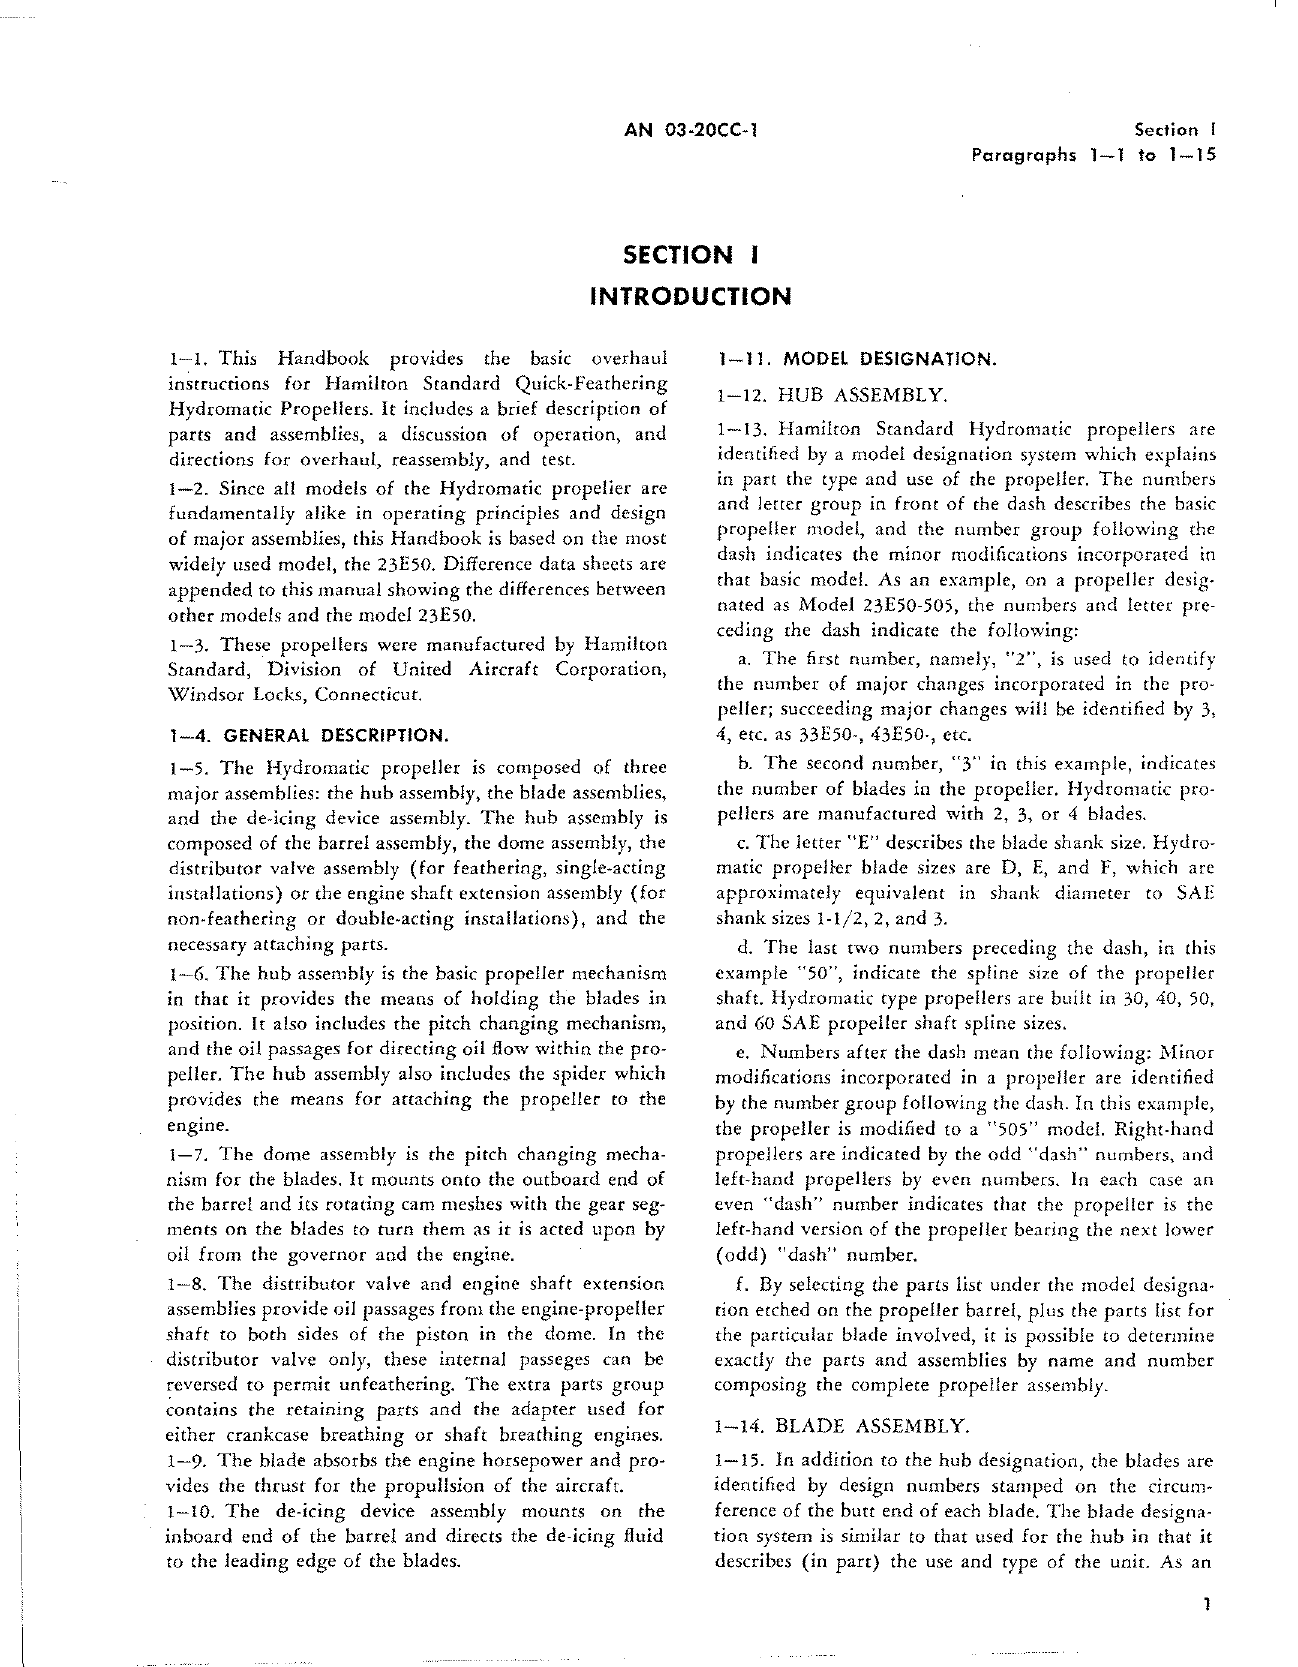 Sample page 5 from AirCorps Library document: Overhaul Instructions for Hydromatic Propellers